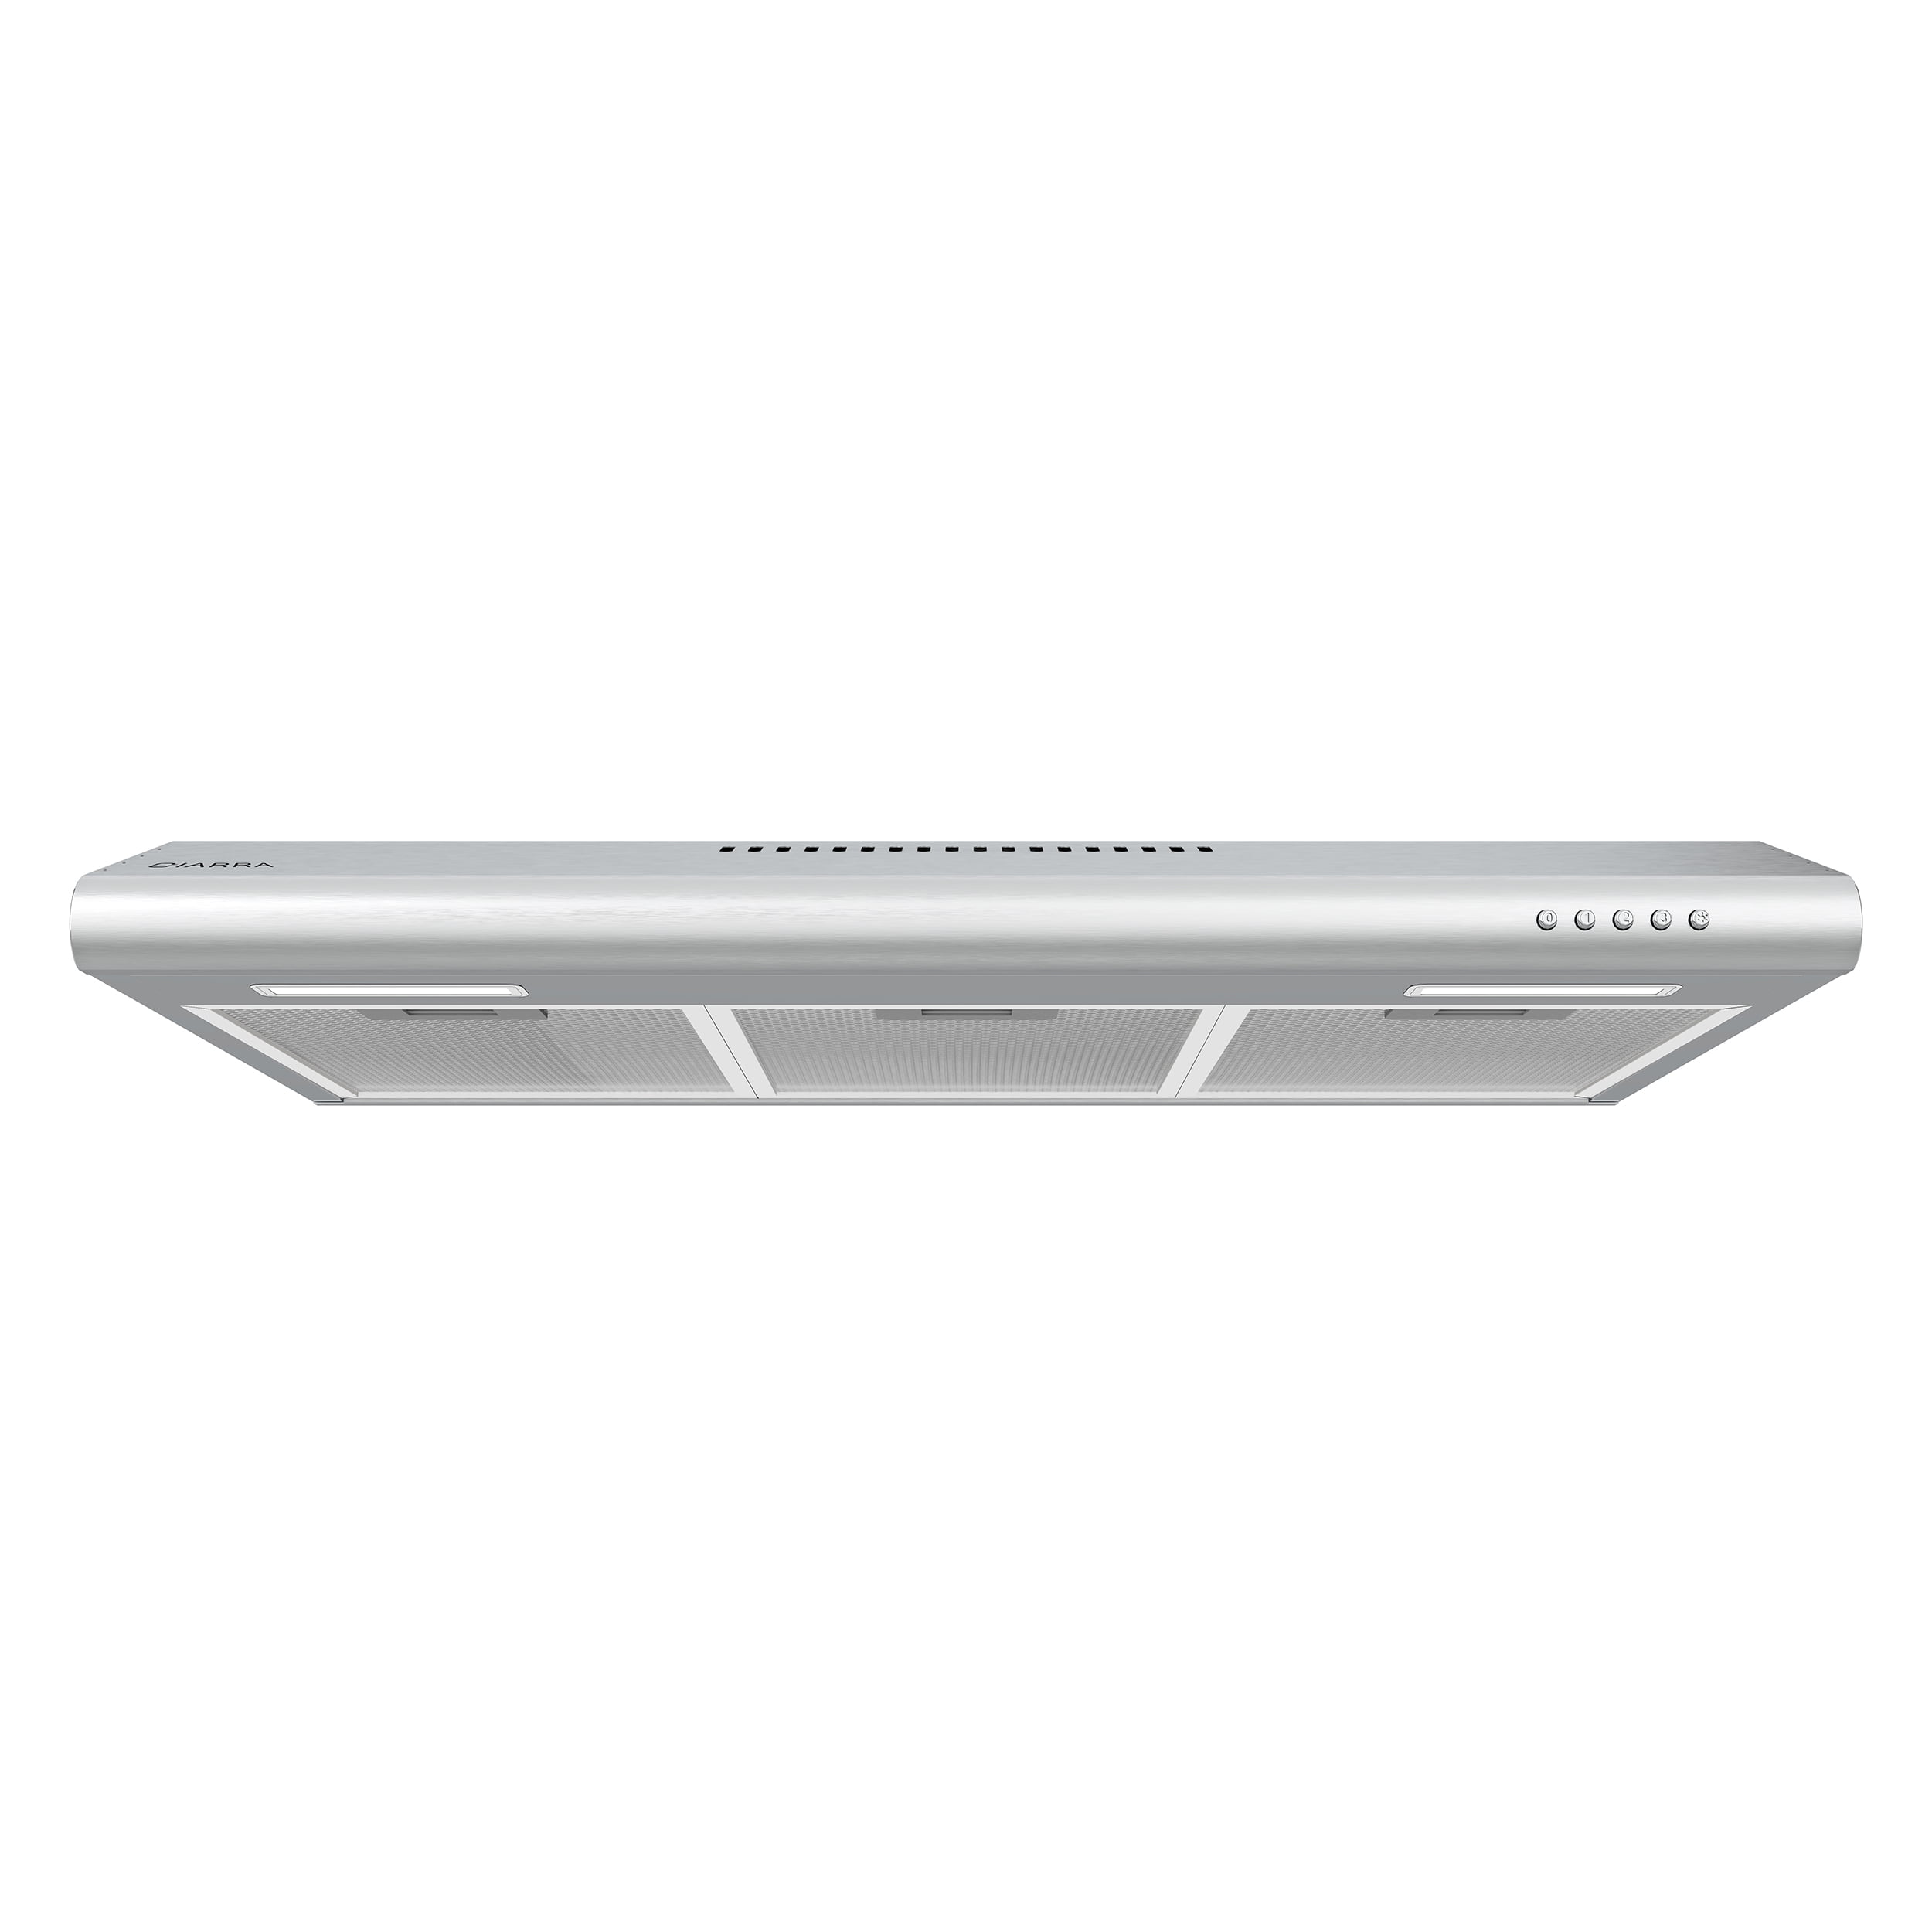 Stainless Steel Range Hood 30 inch KITCHENEXUS 200 CFM Under Cabinet Range  Hood Ducted/Ductless Convertible Duct with LED Lighting, Reusable Filters